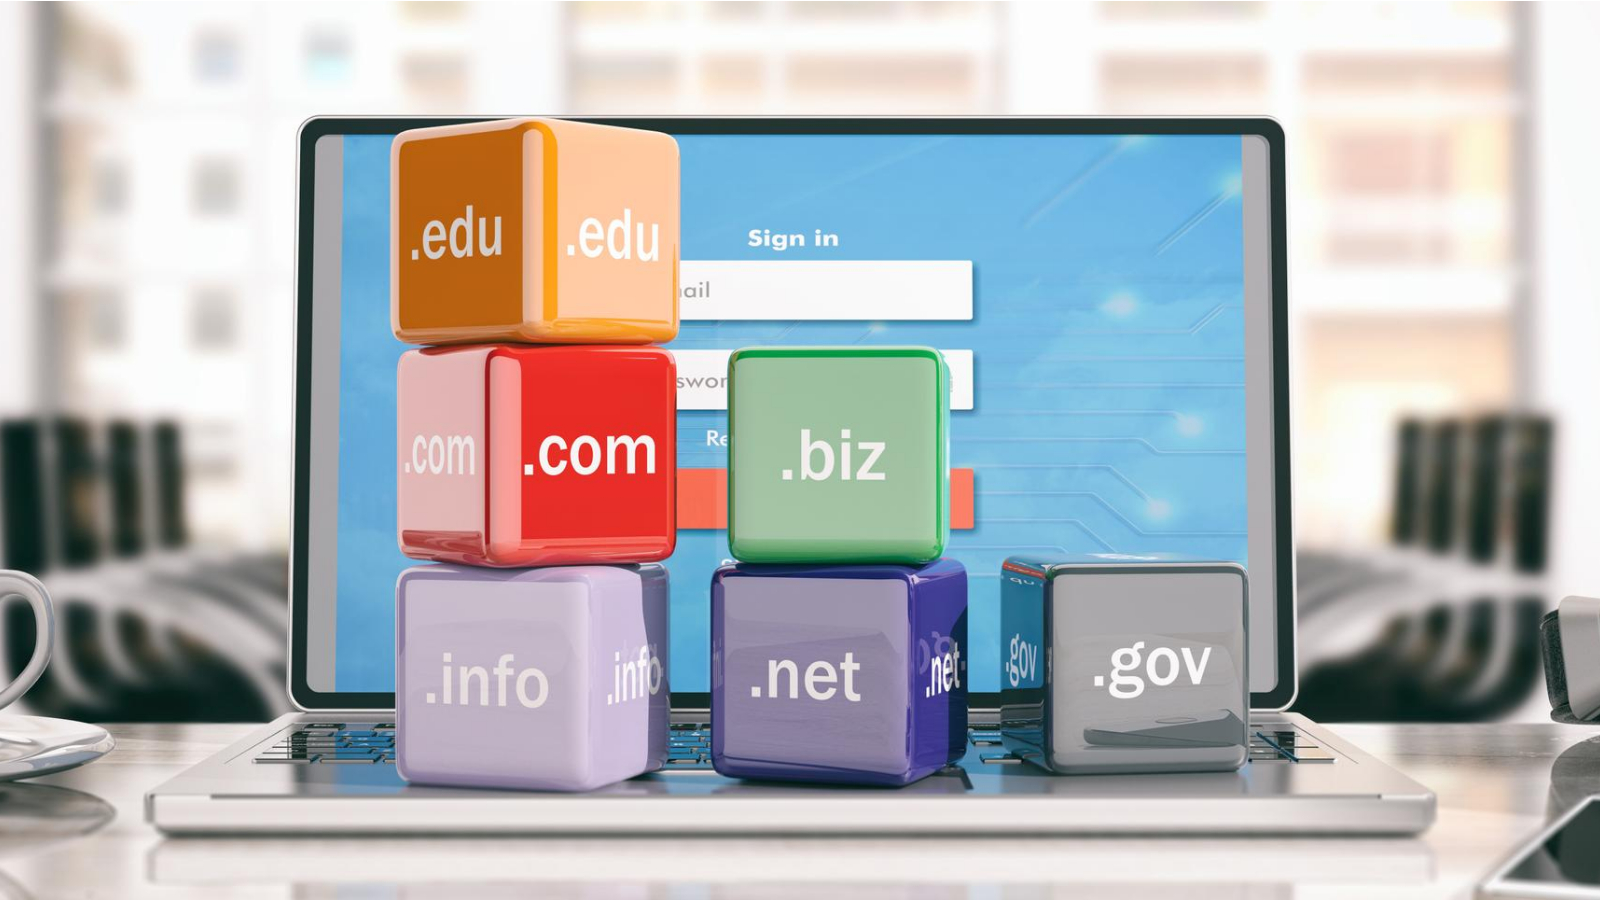 cubes with different TLDs (.com, .net) in front of a laptop screen showing a login dashboard background